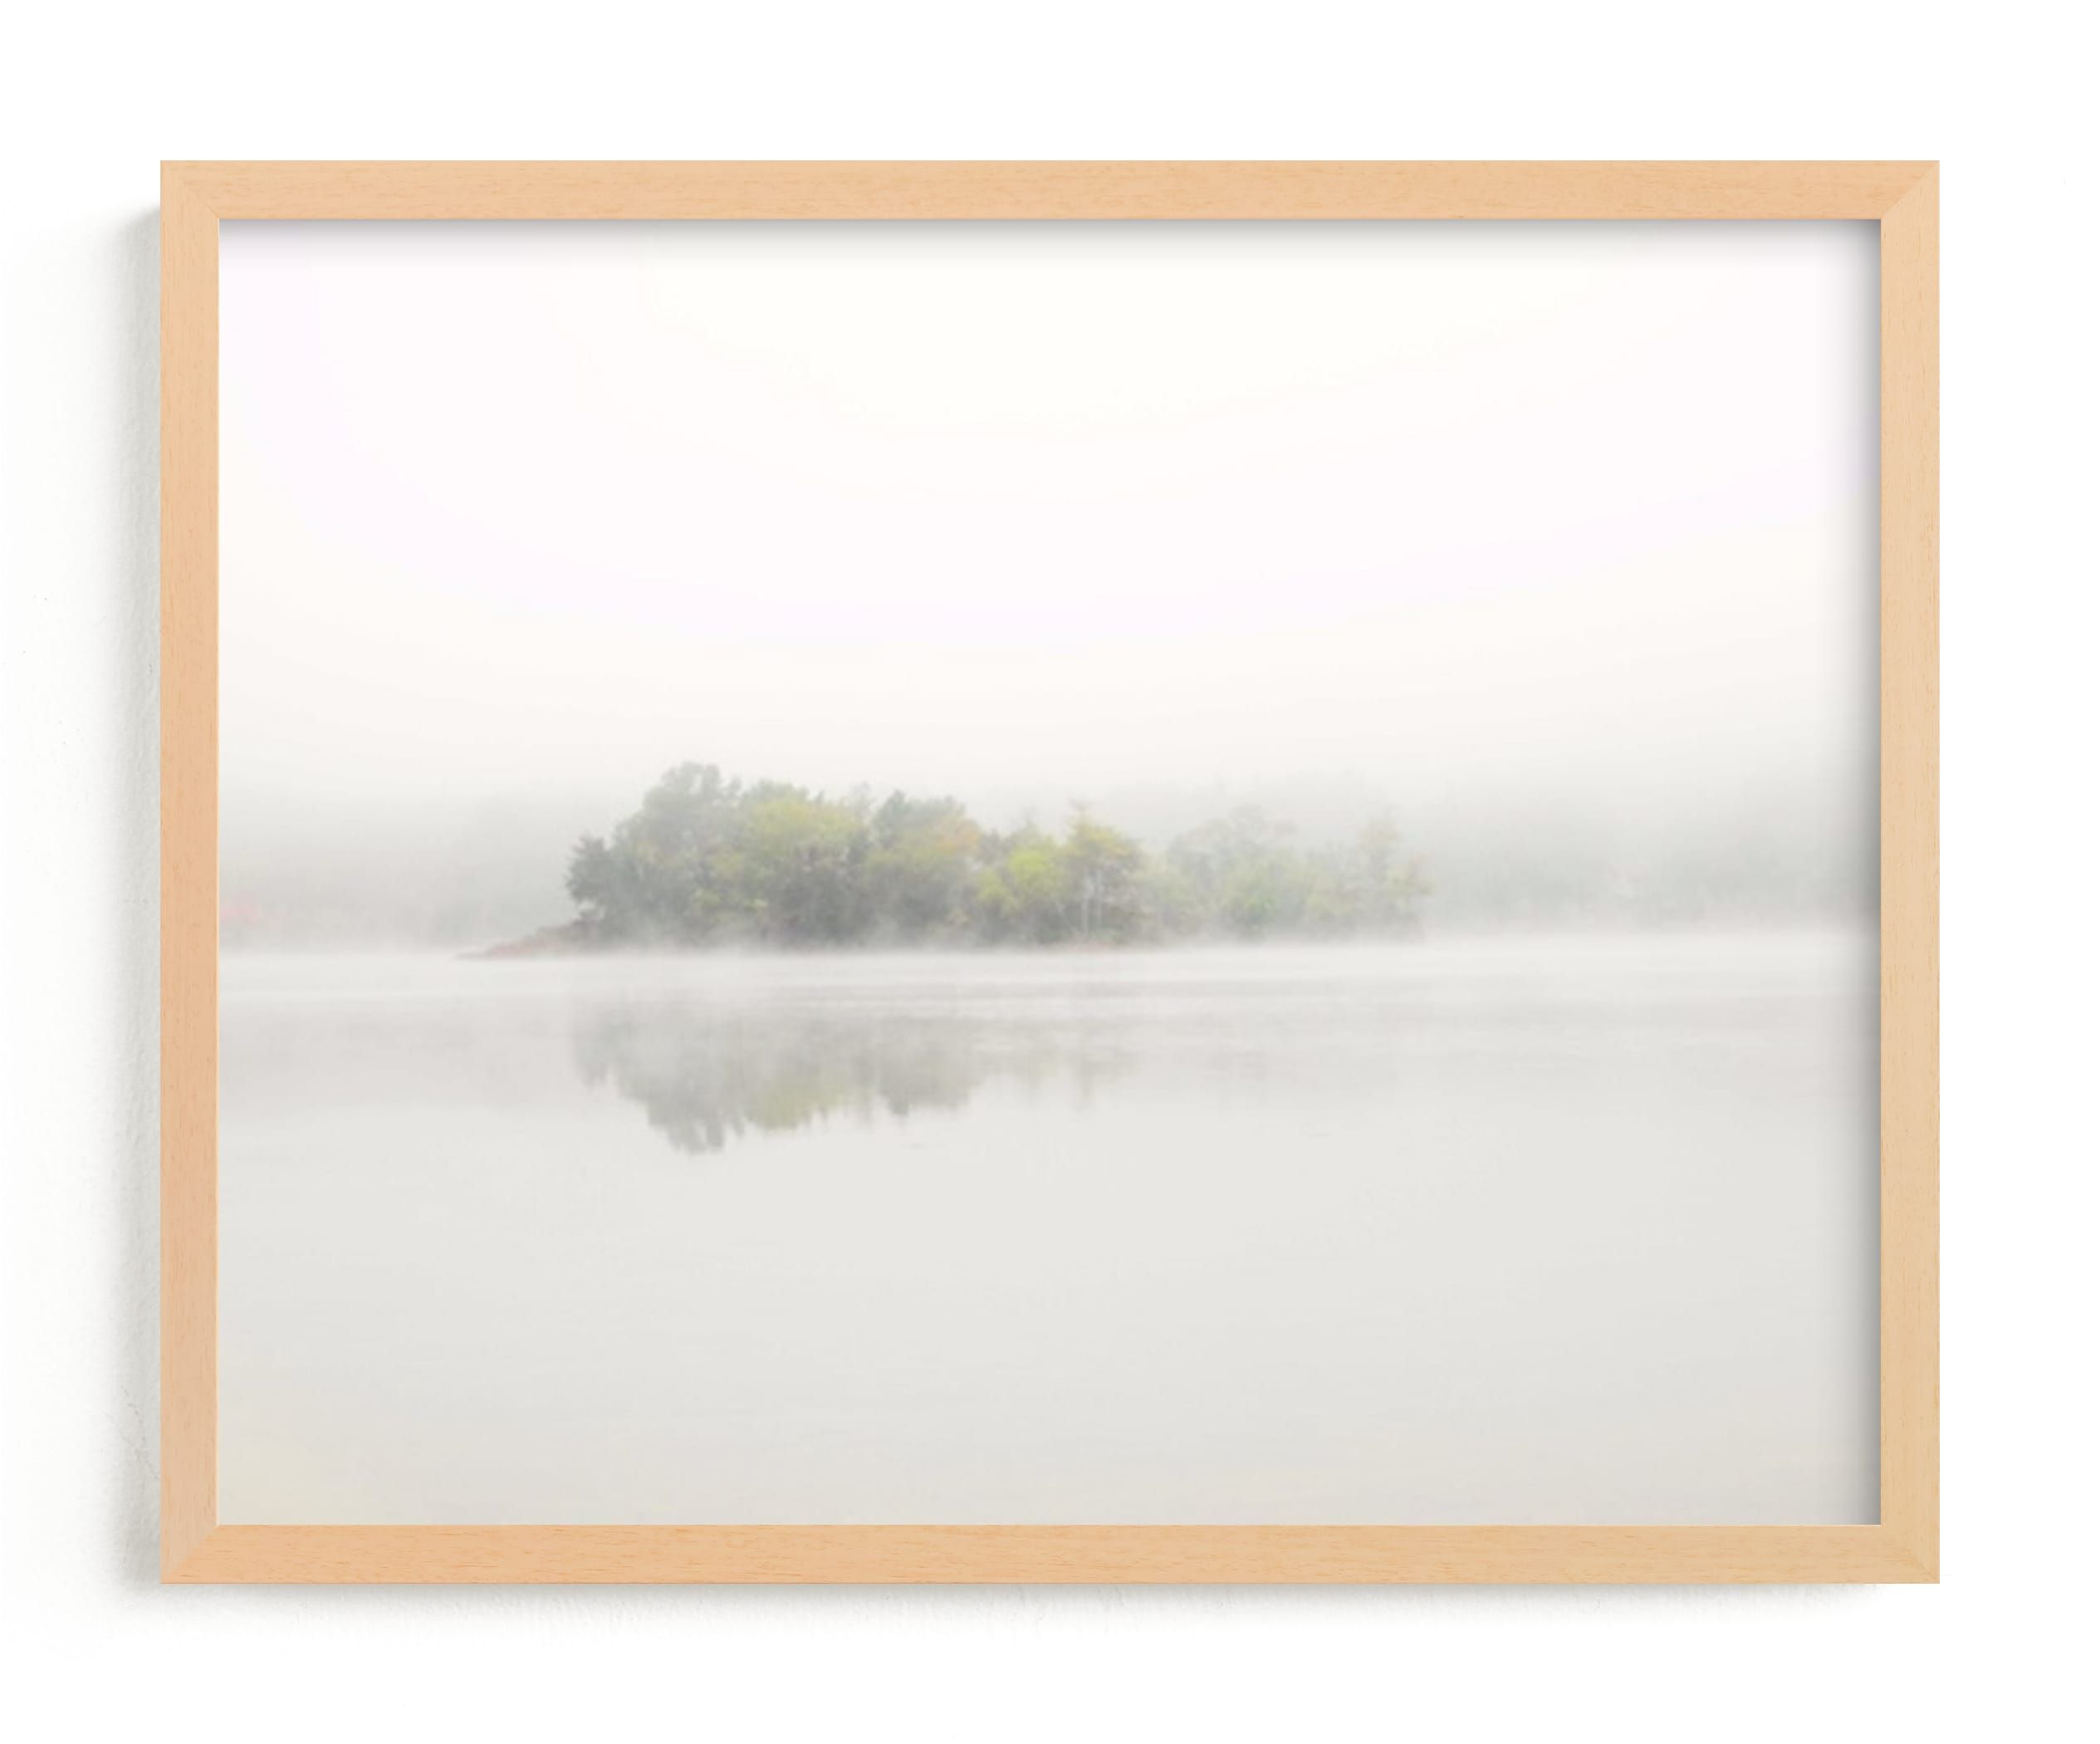 "The Island" - Photography Limited Edition Art Print by S.L. Bird. | Minted